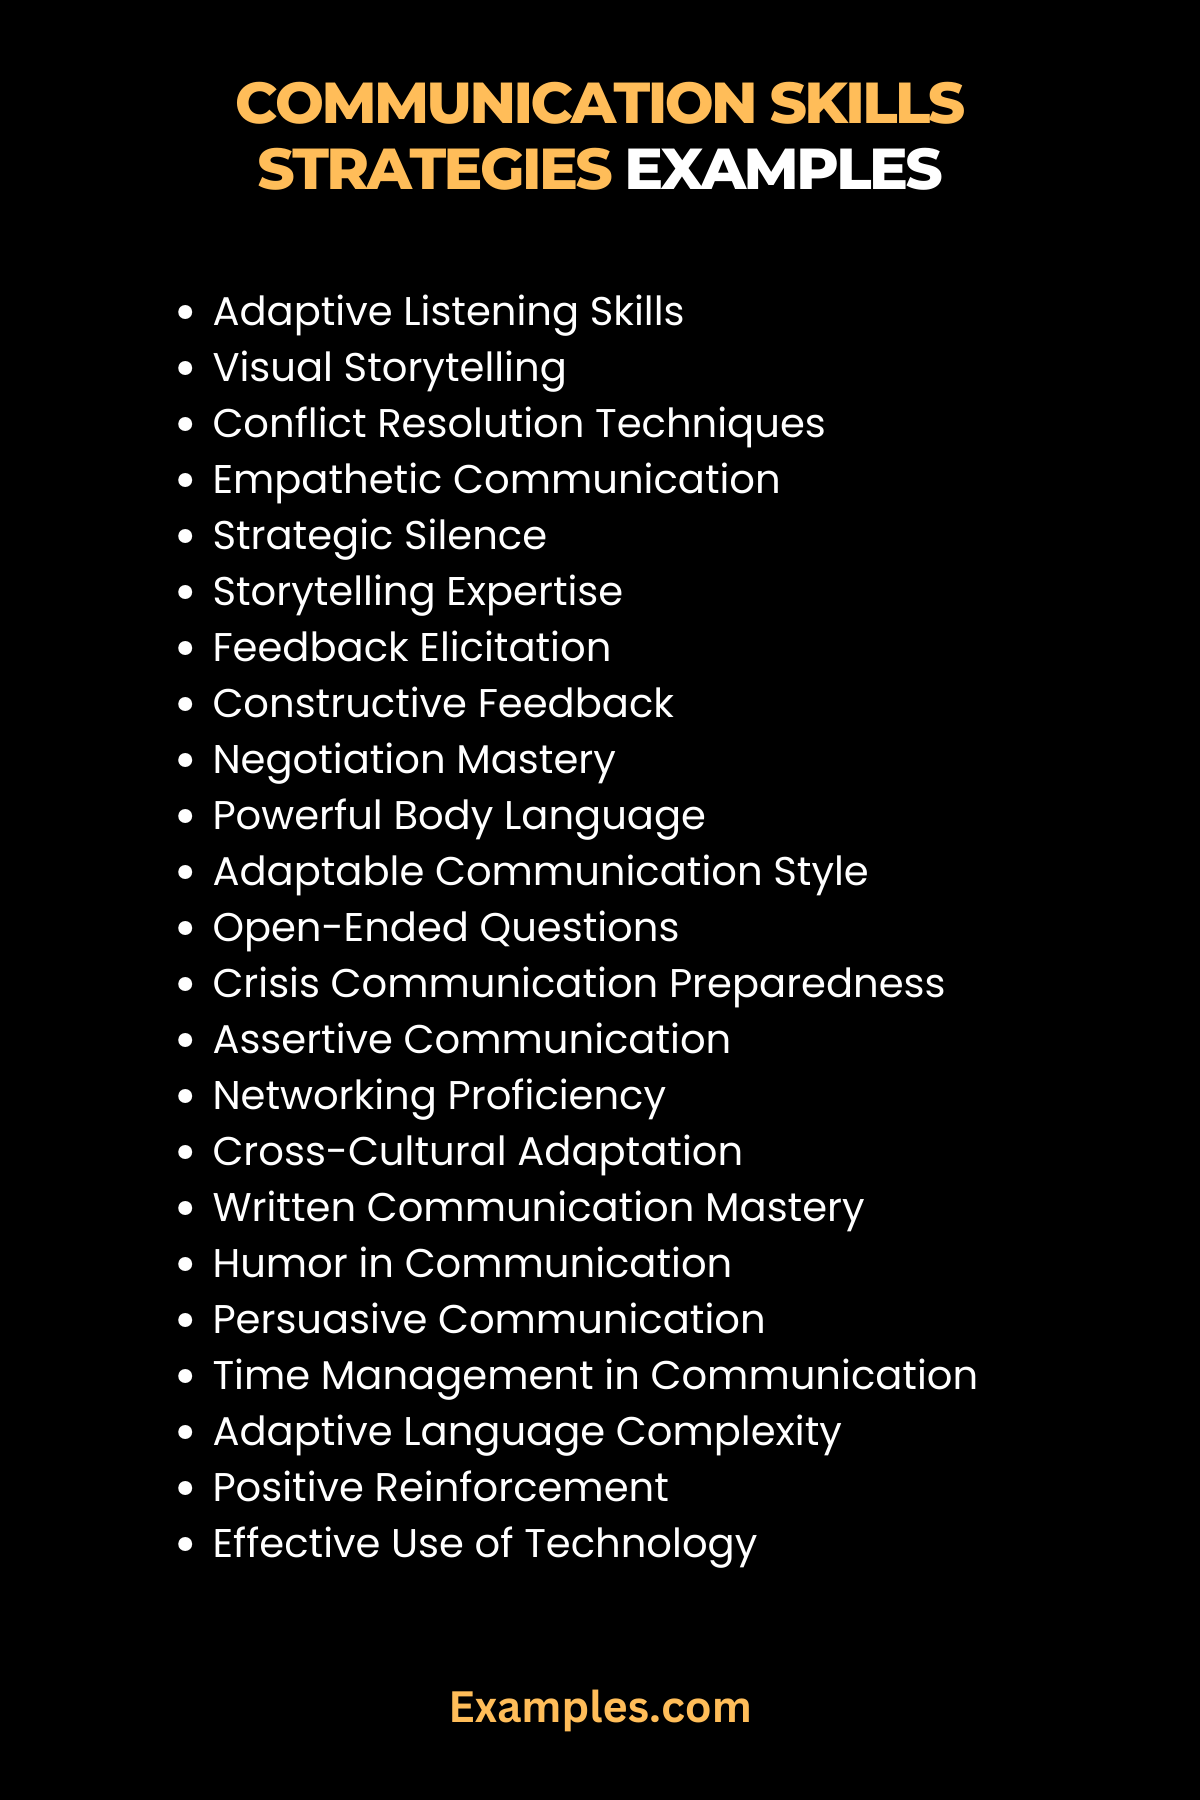 strategies for communication skills examples list one